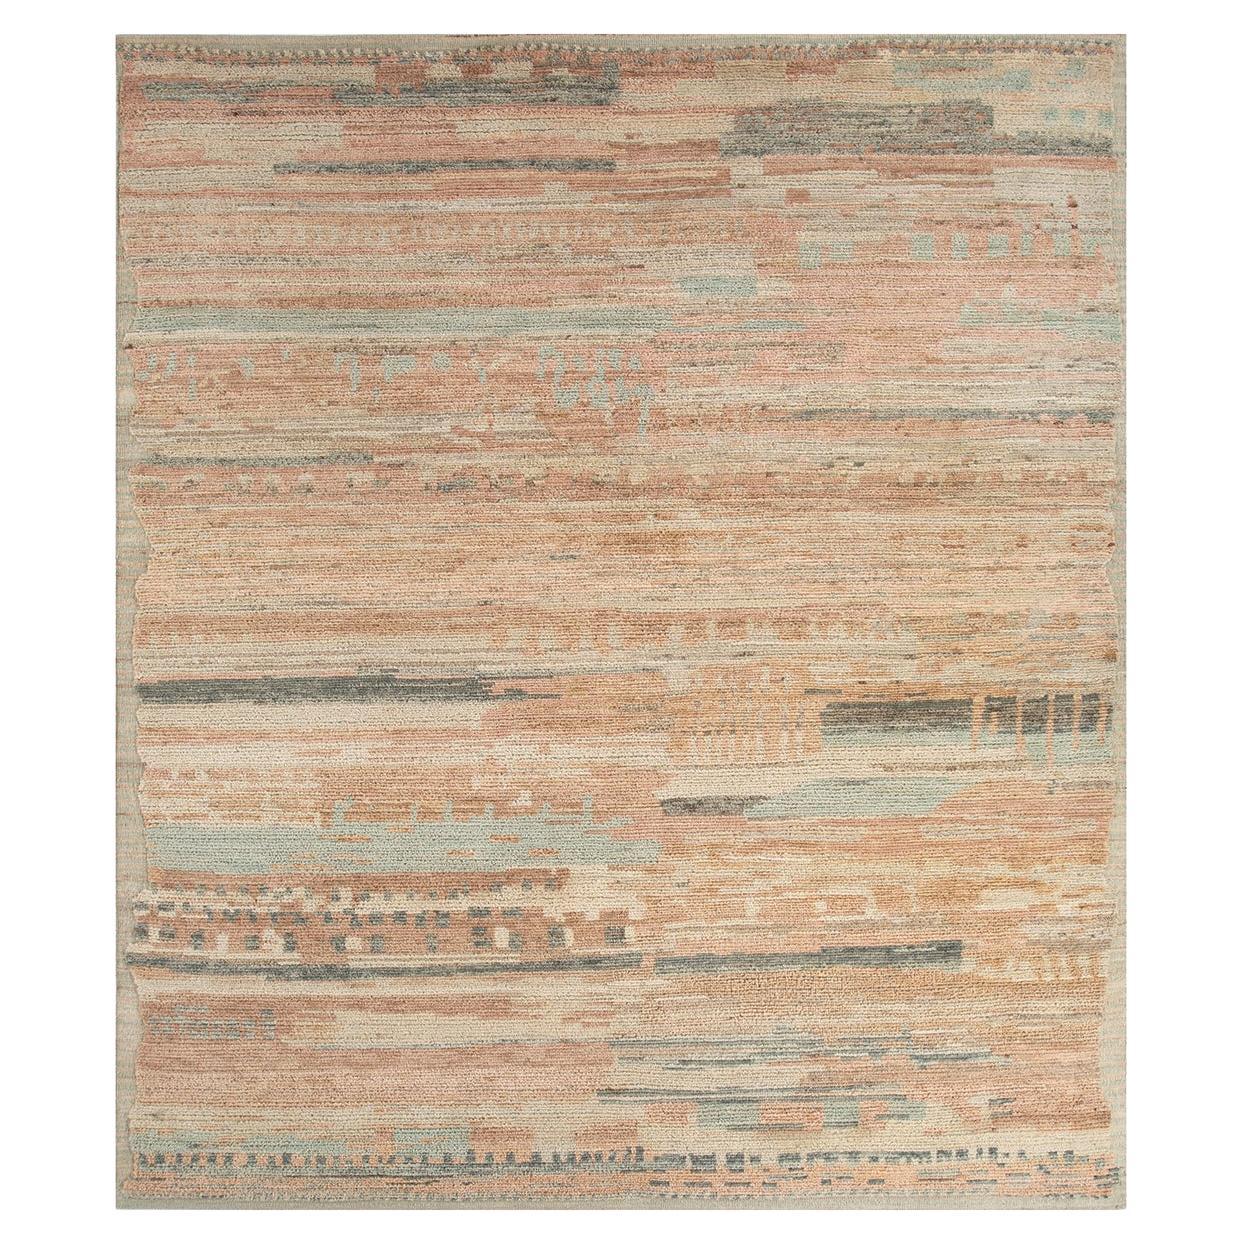 Stacked Rug by Rural Weavers, Knotted, Wool, 240x300cm